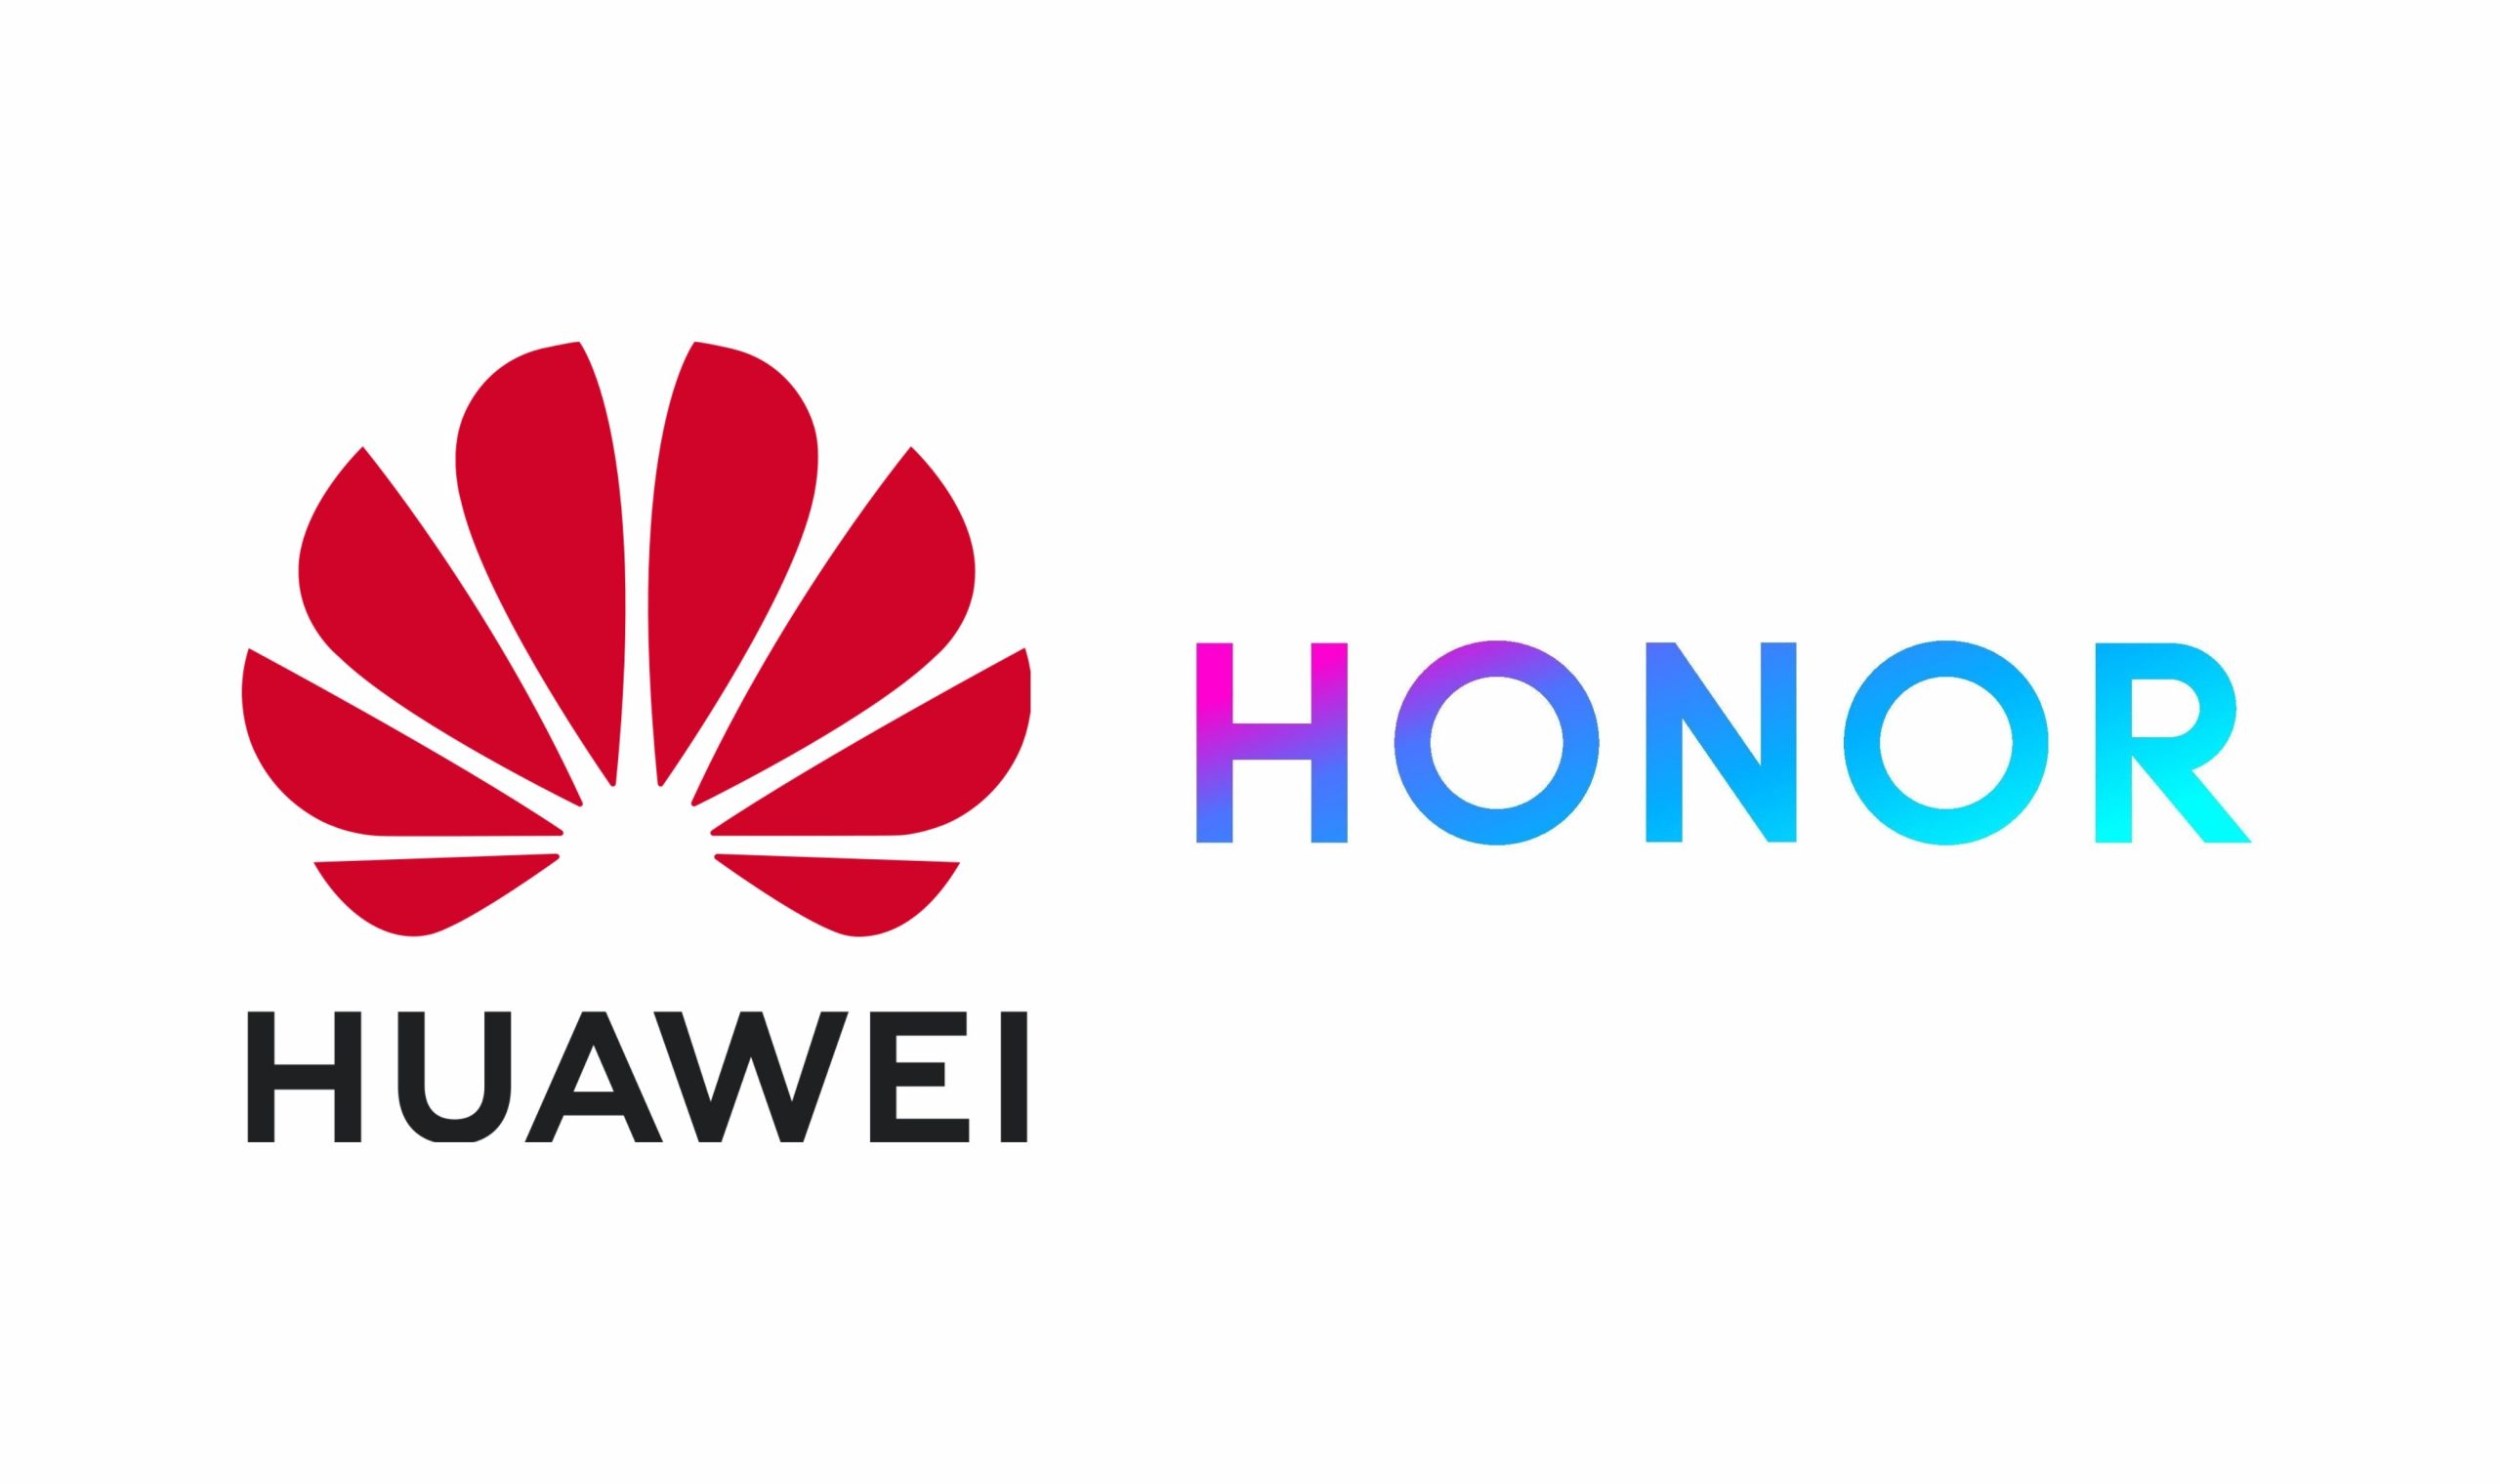 [Leak] Here’s the list of new Huawei and Honor smartphones/laptops launching in Europe